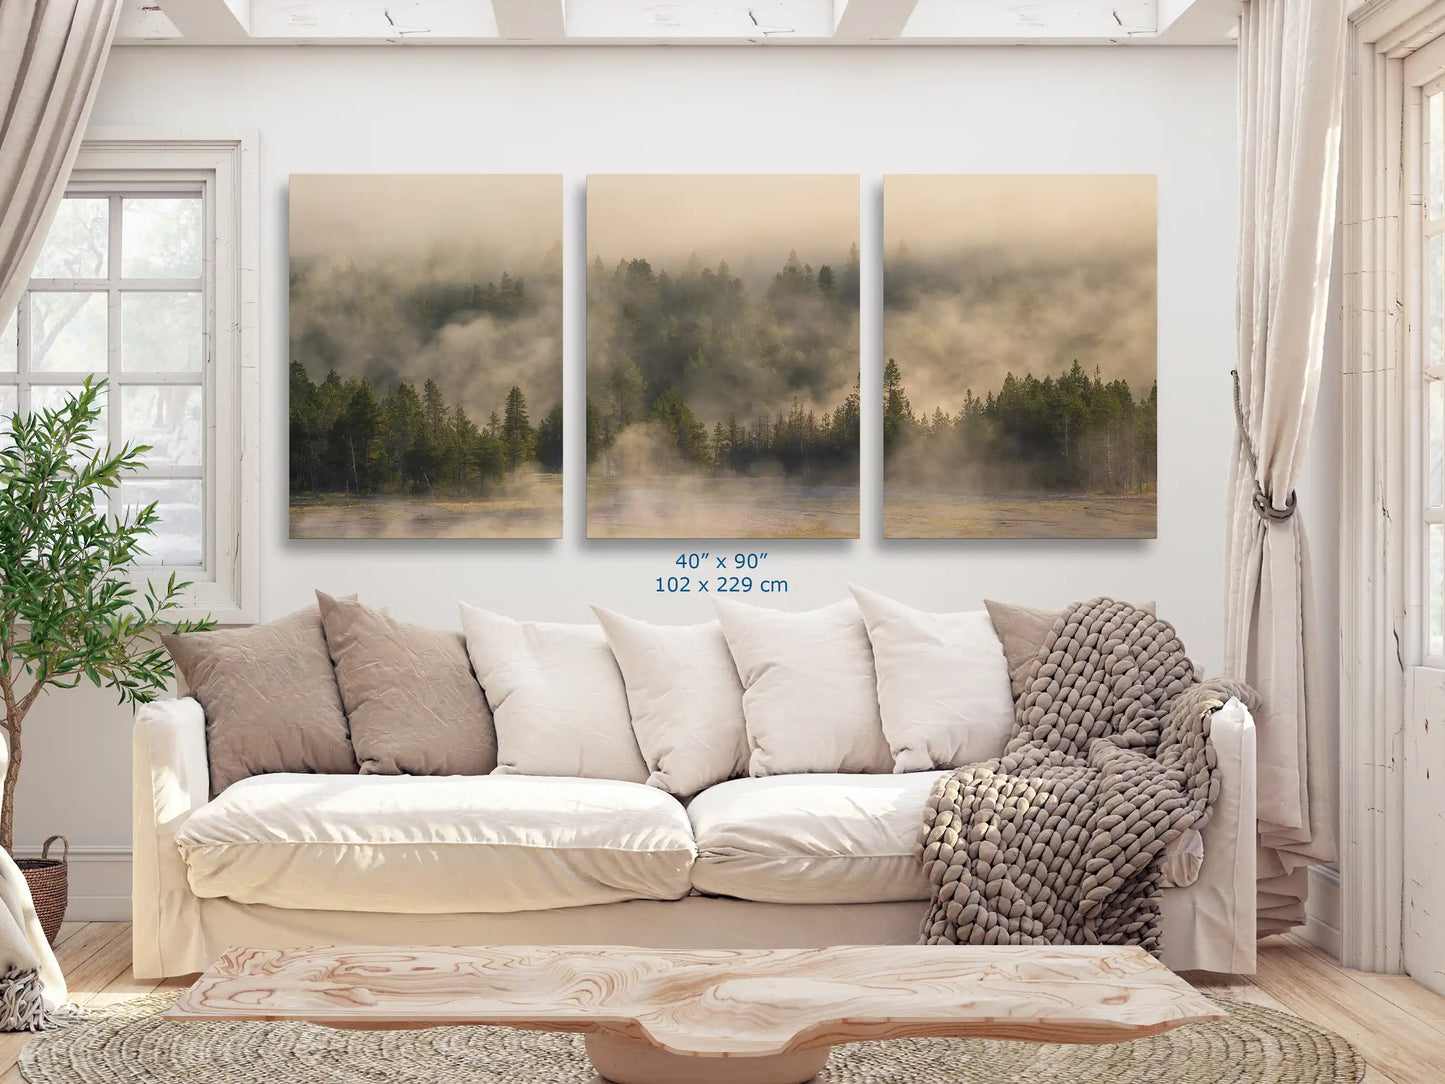 An expansive 40x90 triptych canvas print of a foggy forest in Yellowstone, serving as a stunning focal point in a spacious living room.